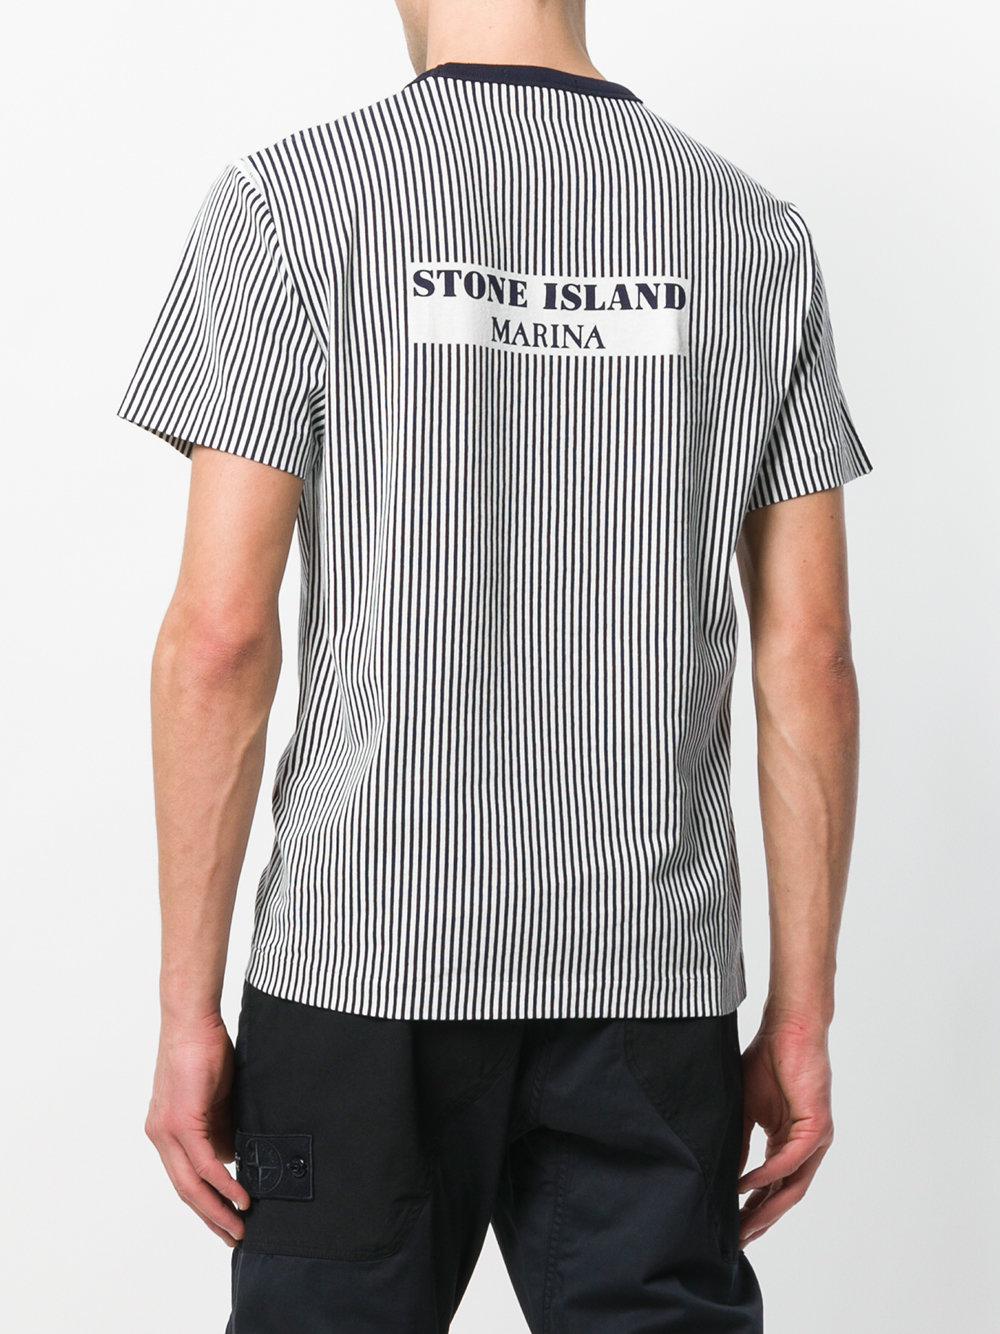 Stone Island Marina Striped T-shirt in Blue for Men | Lyst